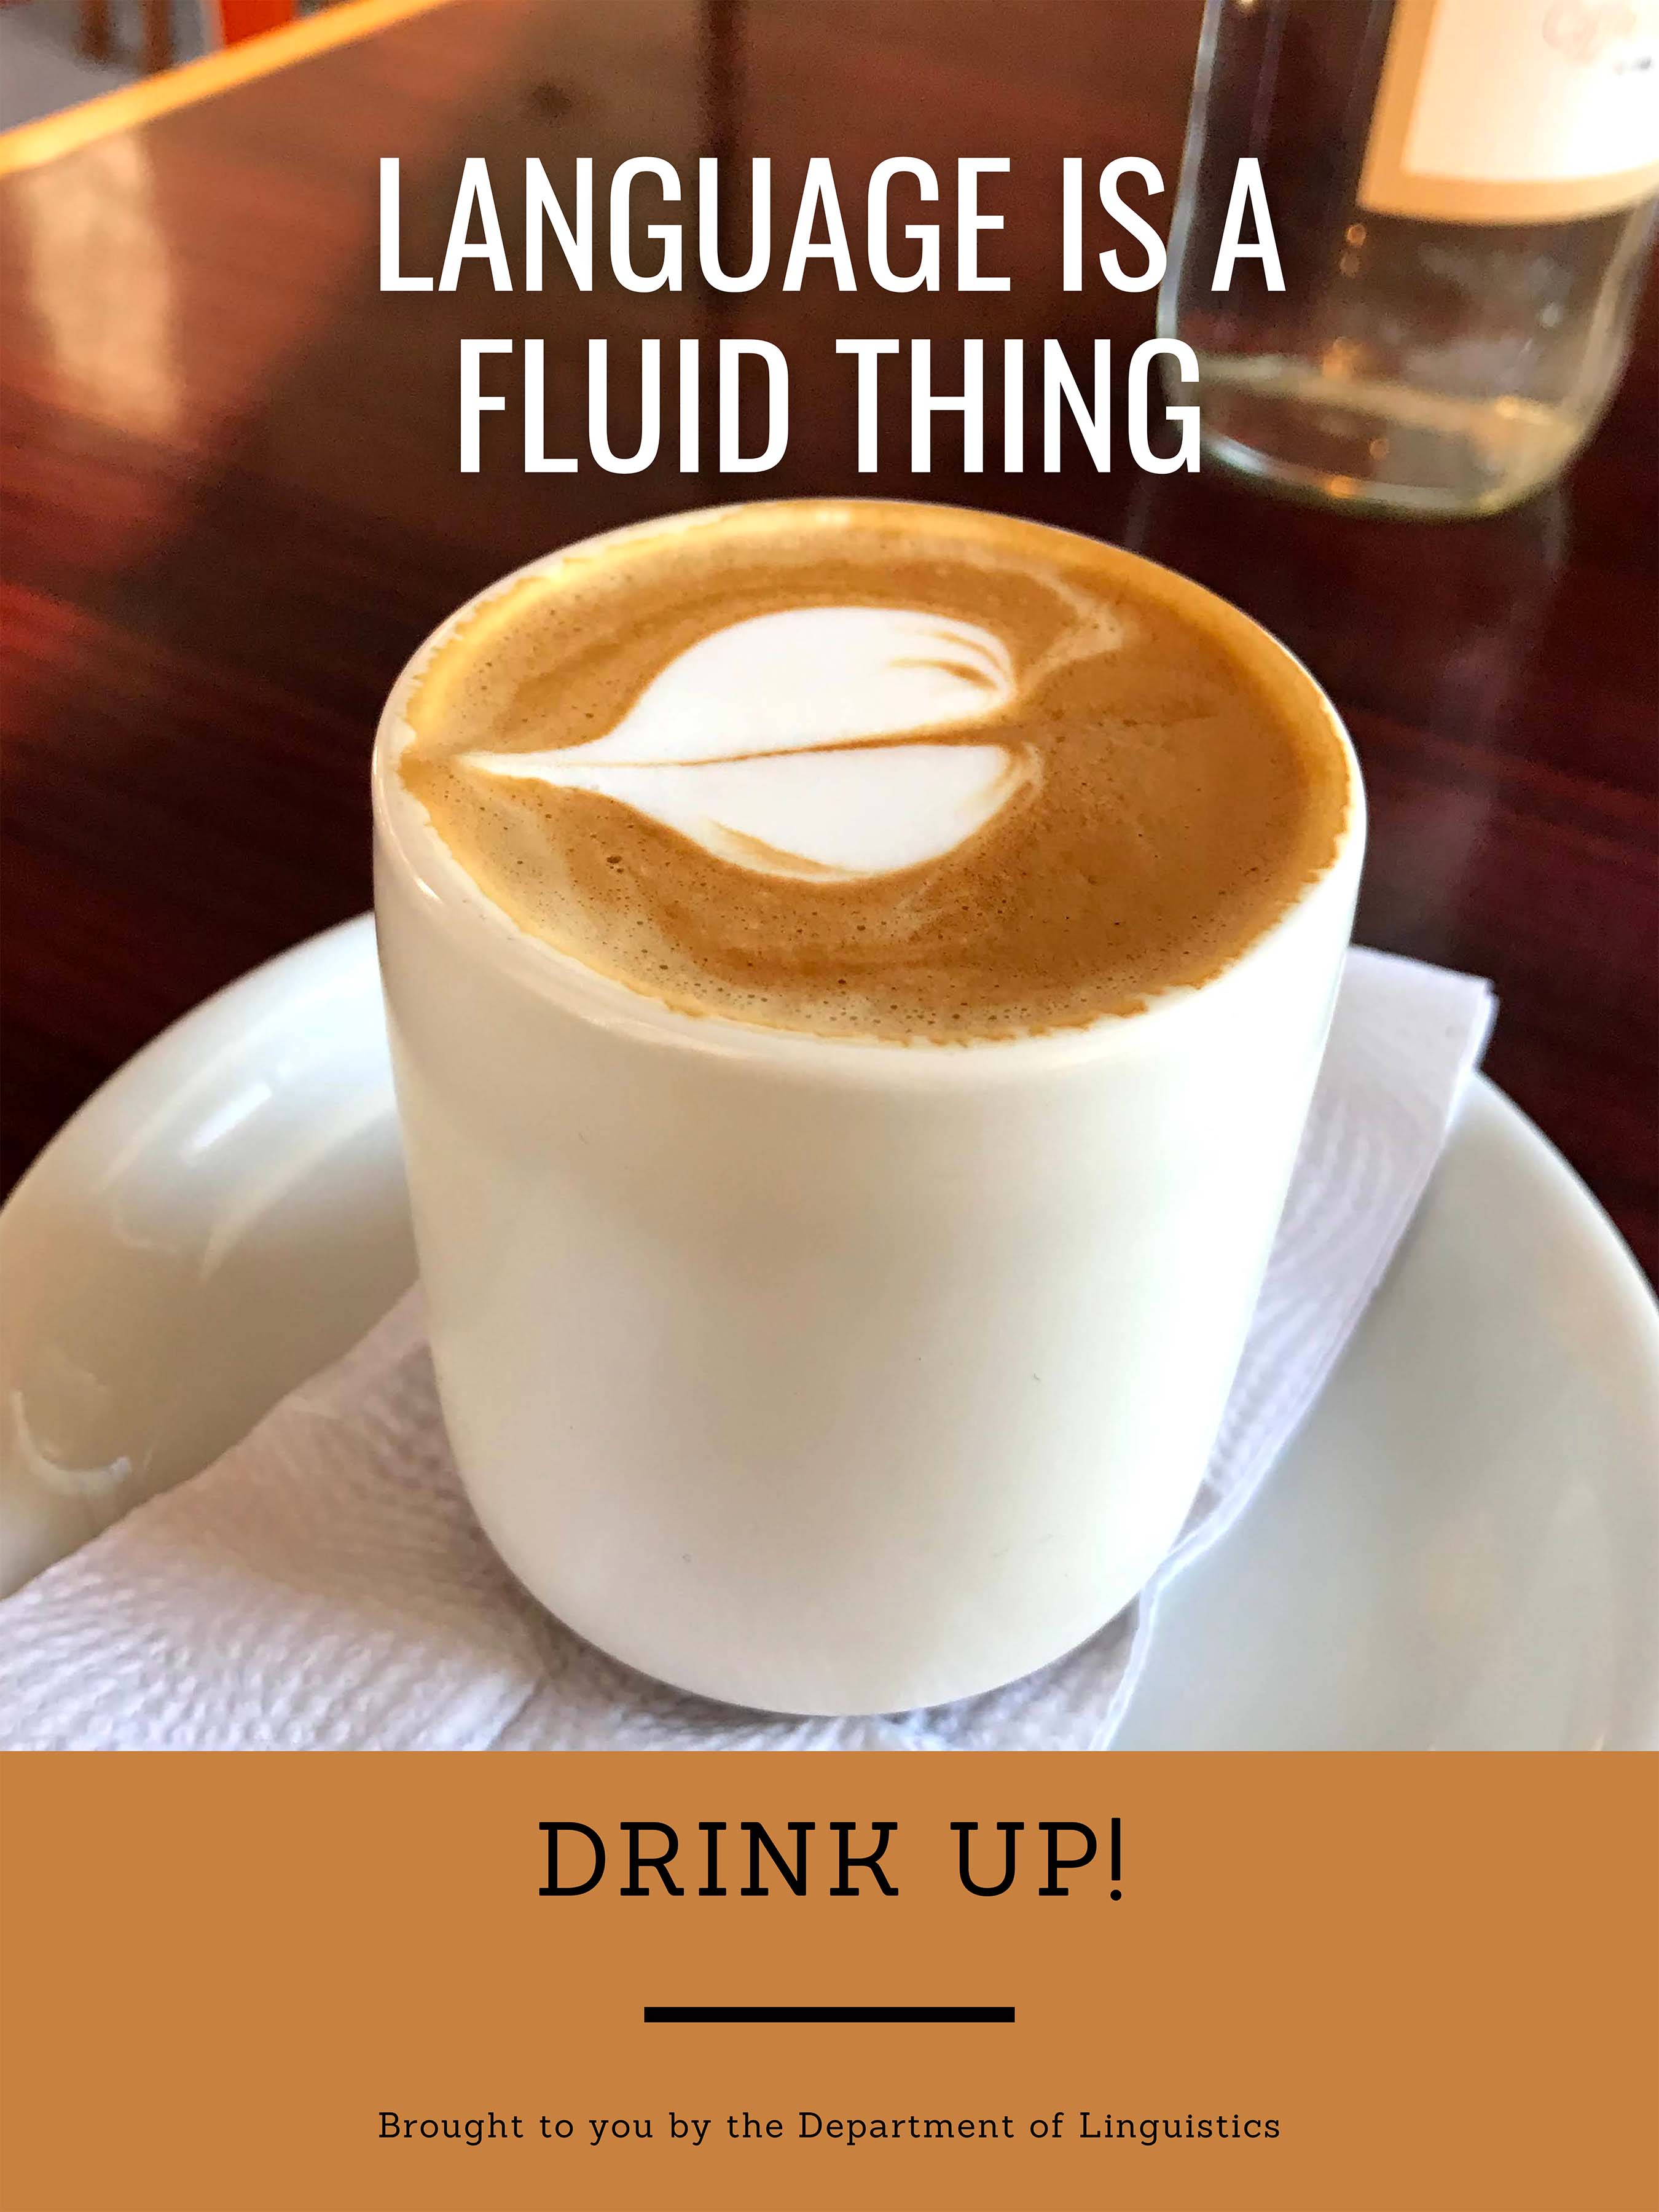 Language is a fluid thing. Drink up! Brought to you by the Department of Linguistics. Shows a fancy cup of coffee.